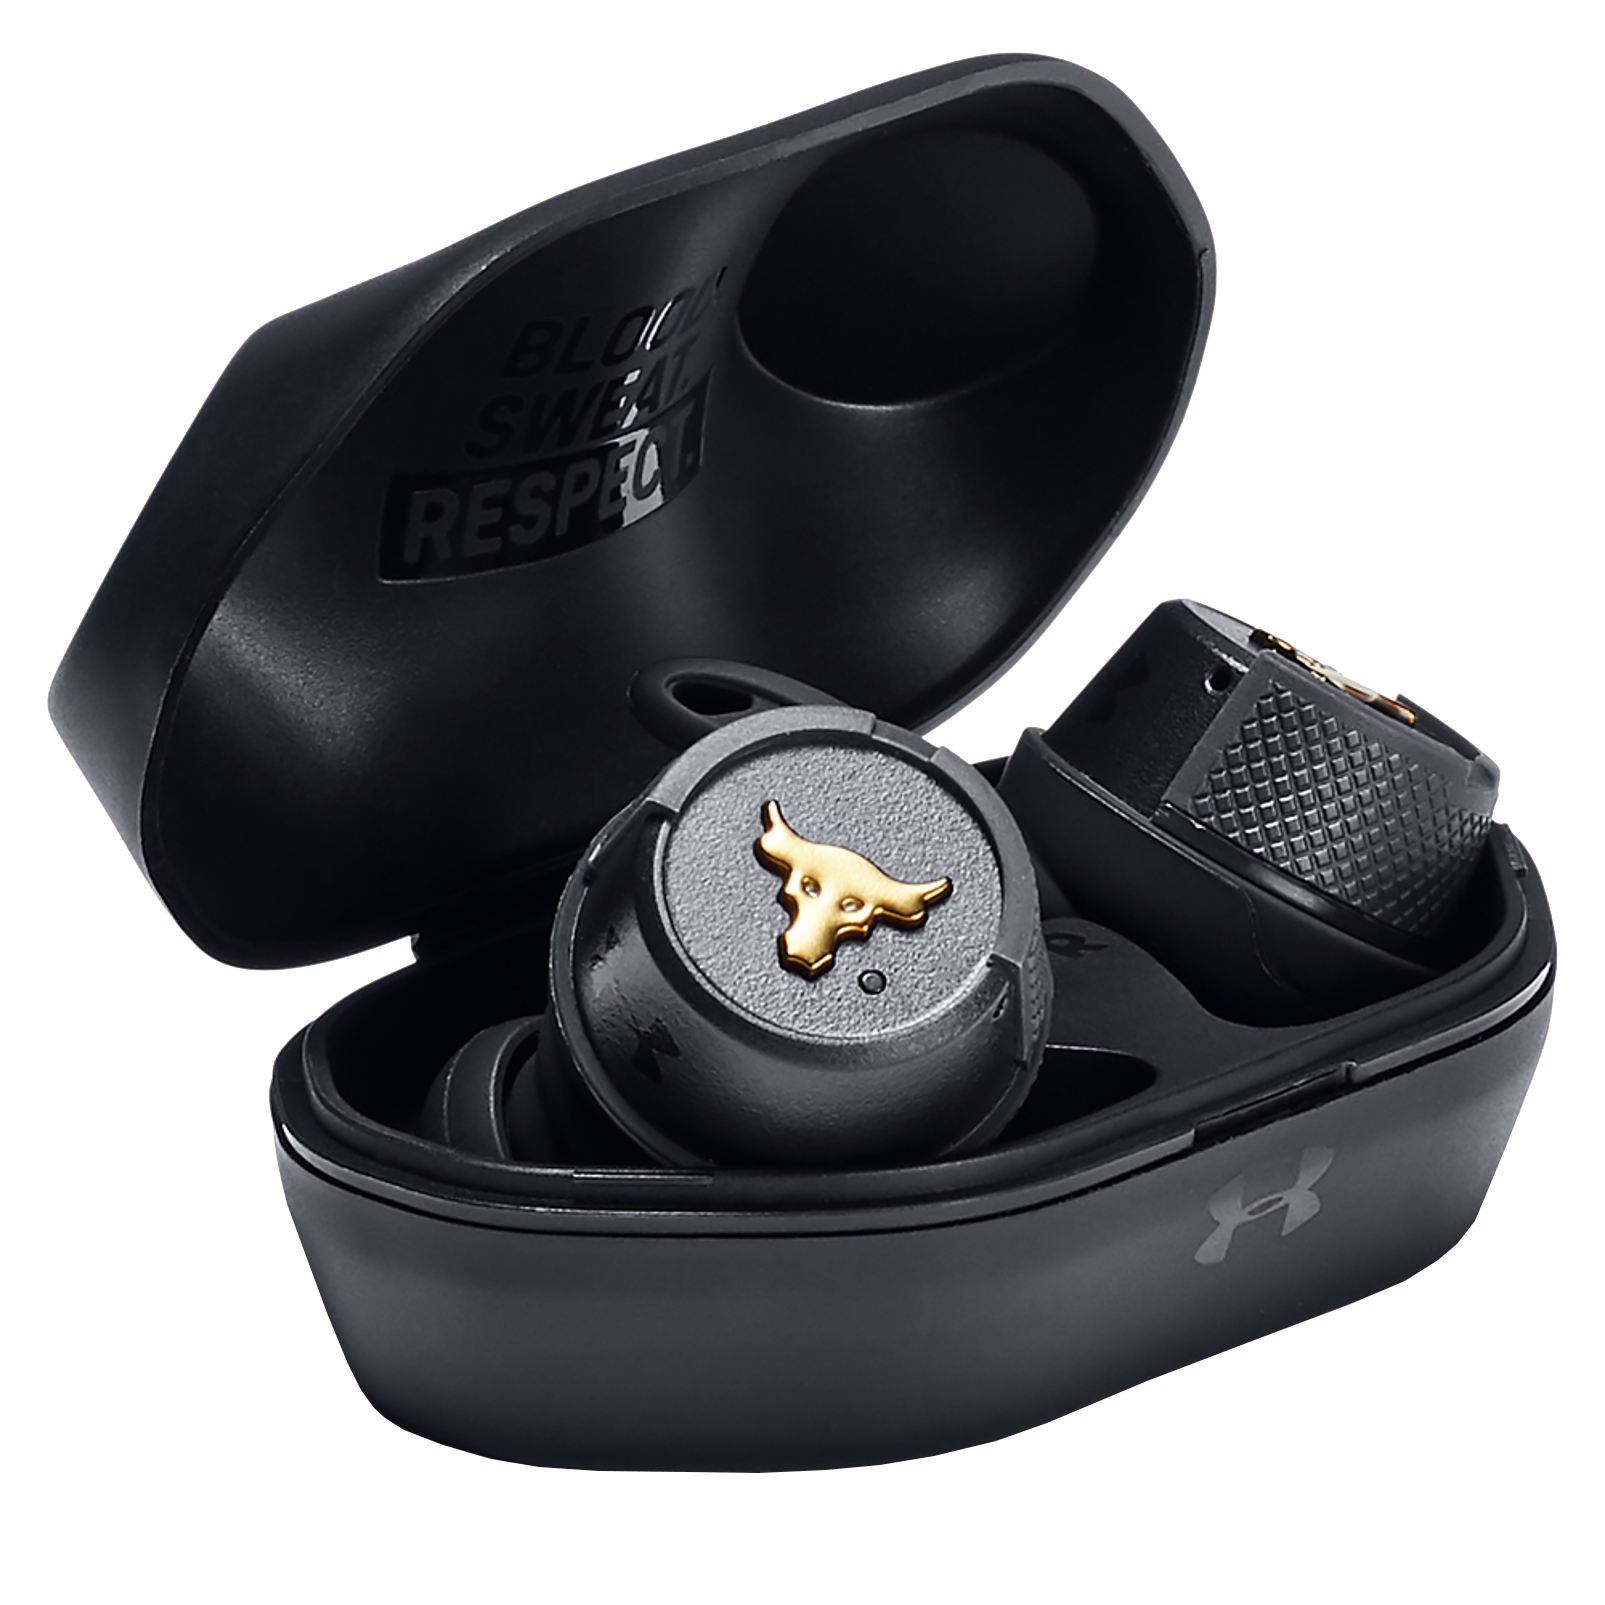 UA Project Rock True Wireless – Engineered by JBL - Black - True wireless sport headphones to maximize each and every workout, with JBL technology and sound - Detailshot 4